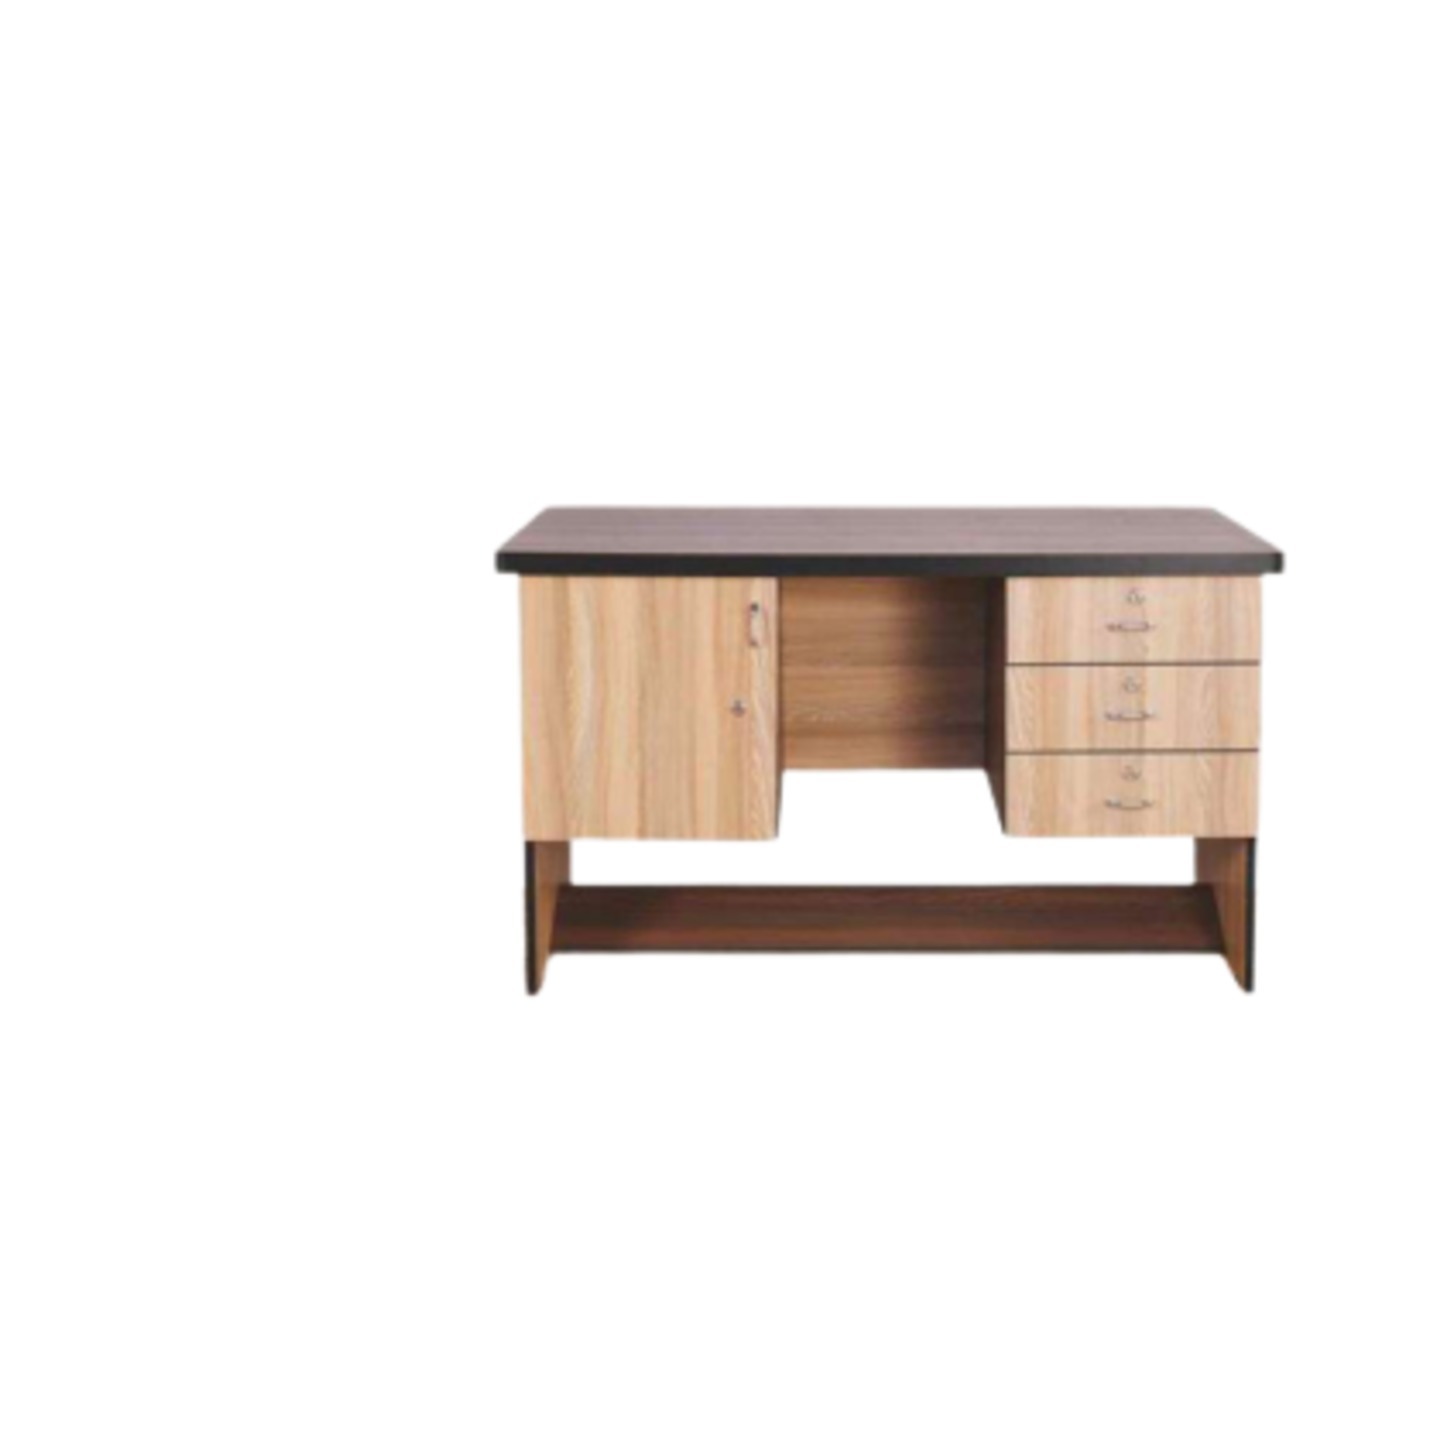 HS Office Table KOT-3 In Brown Colour